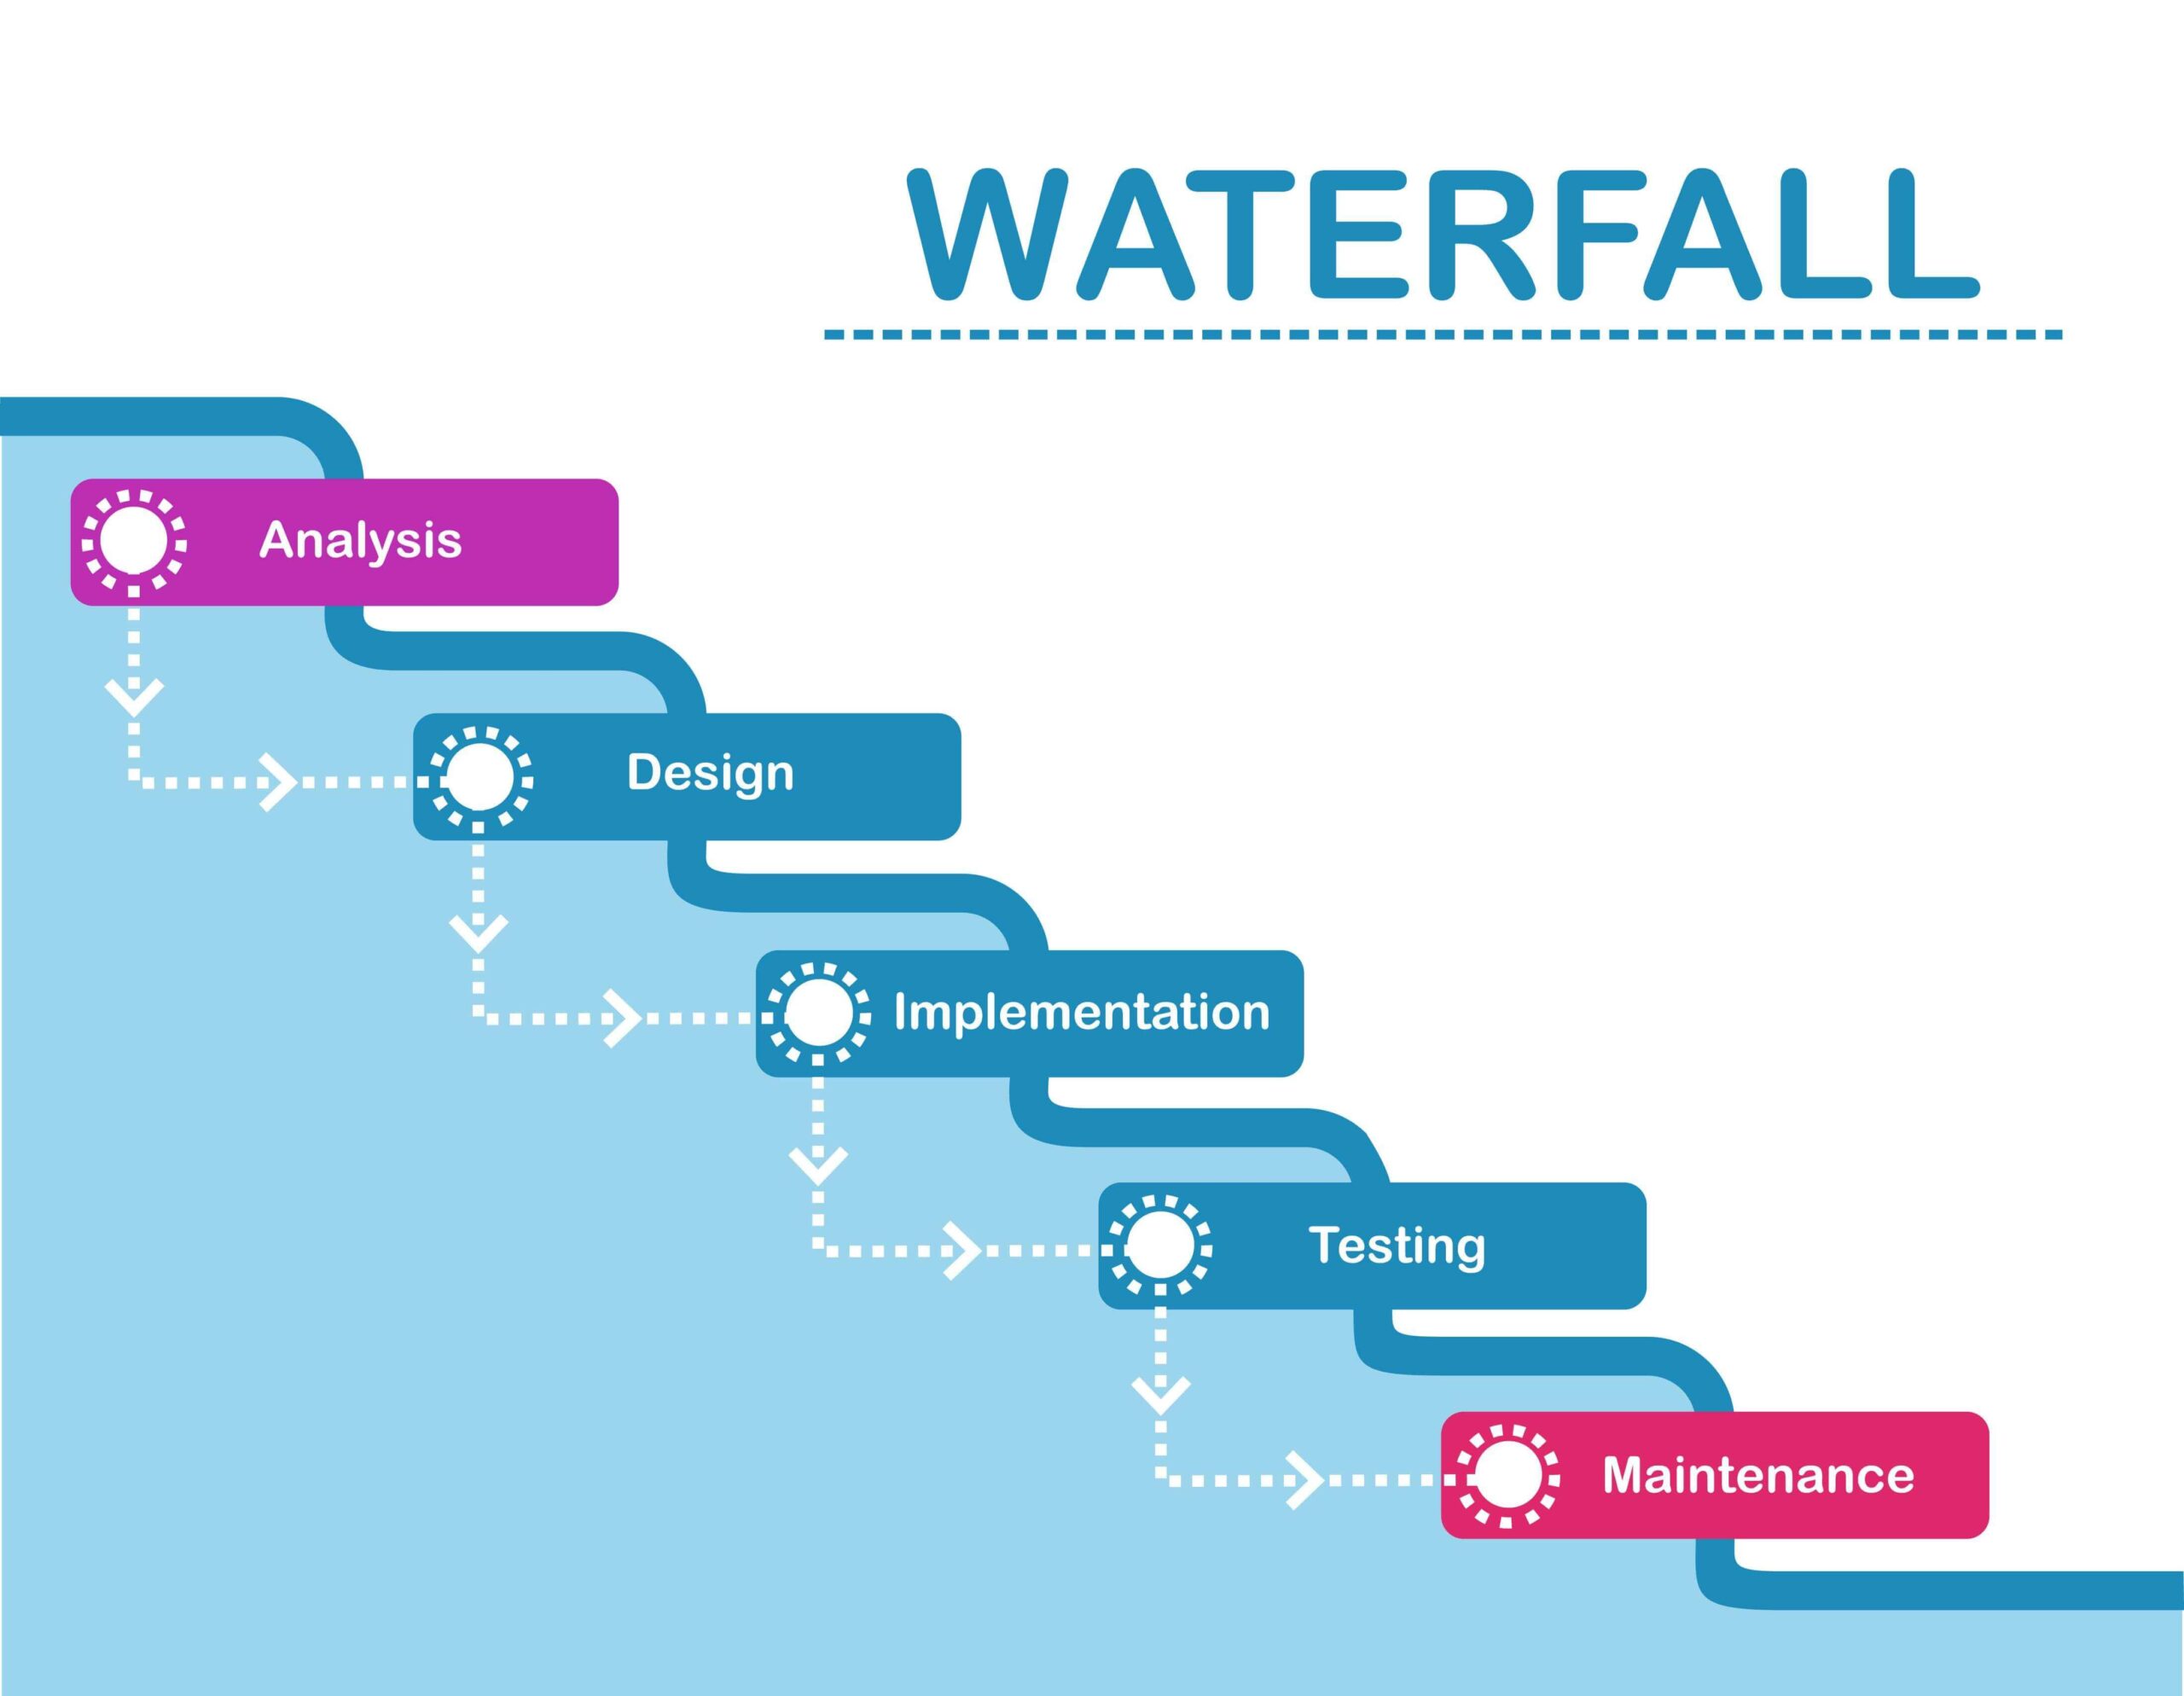 Waterfall Project Management